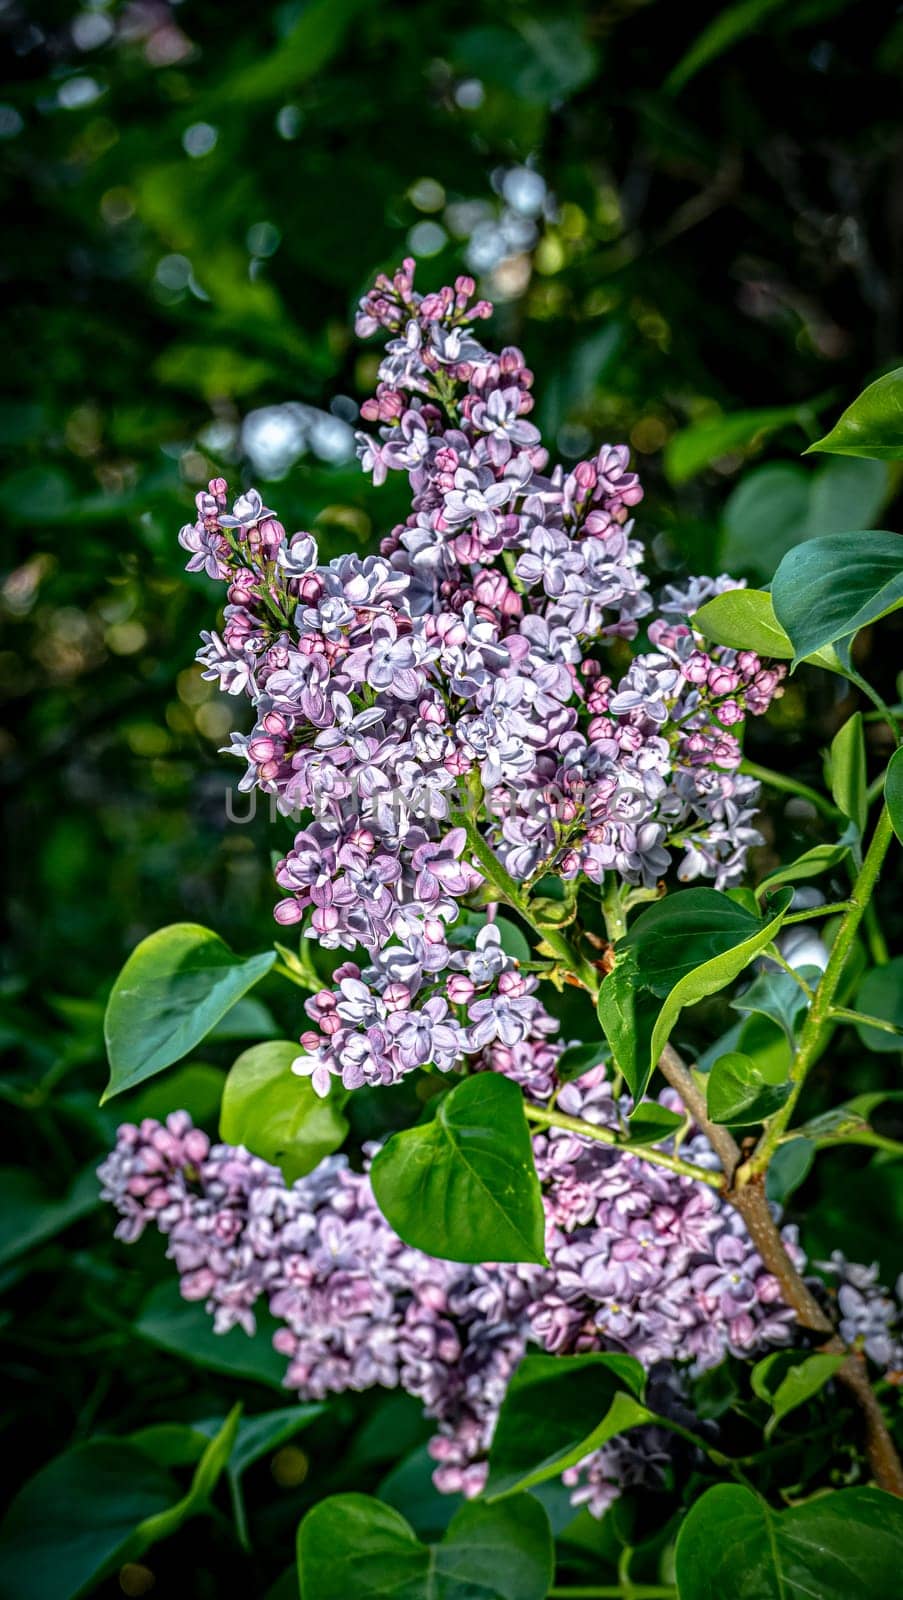 Beautiful flowering branch of lilac flowers close-up macro shot with blurry background. Spring nature floral background, pink purple lilac flowers. Greeting card banner with flowers for the holiday by lempro